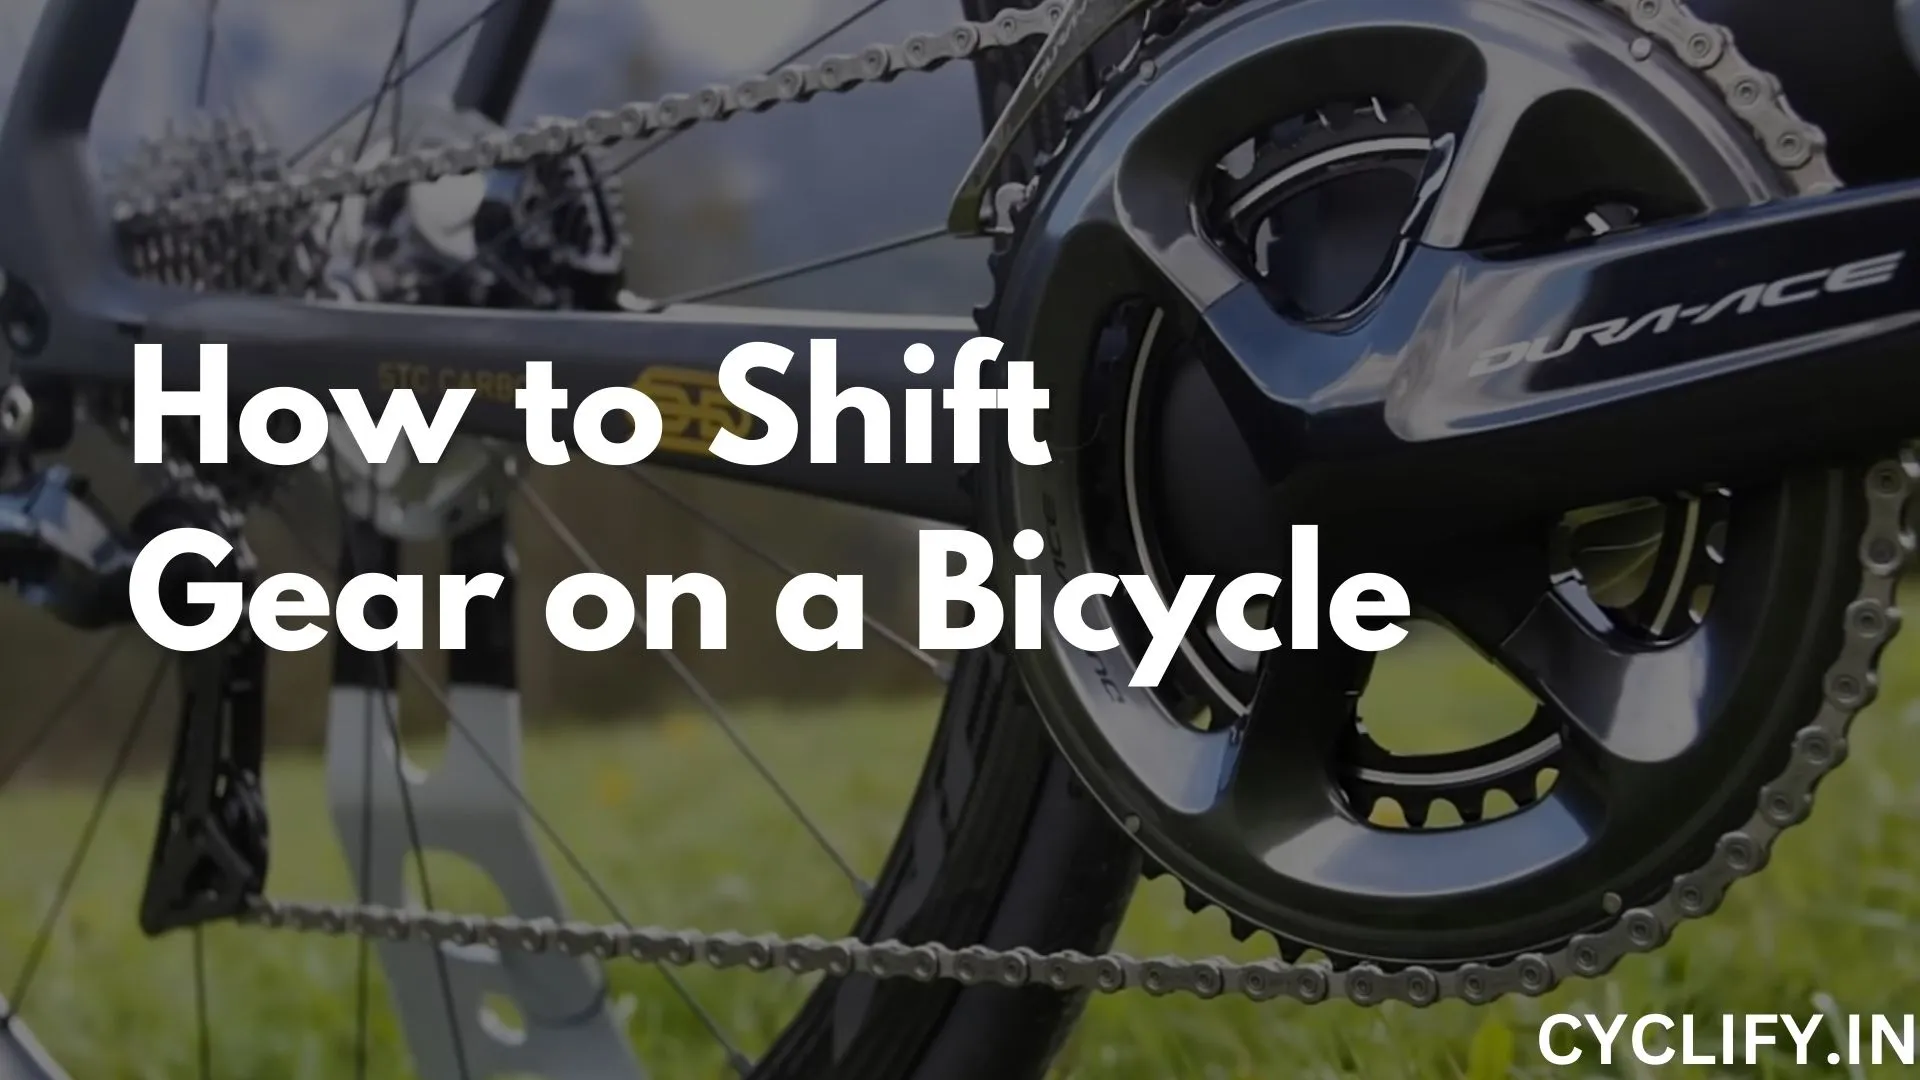 How to Shift Gears on a Bicycle